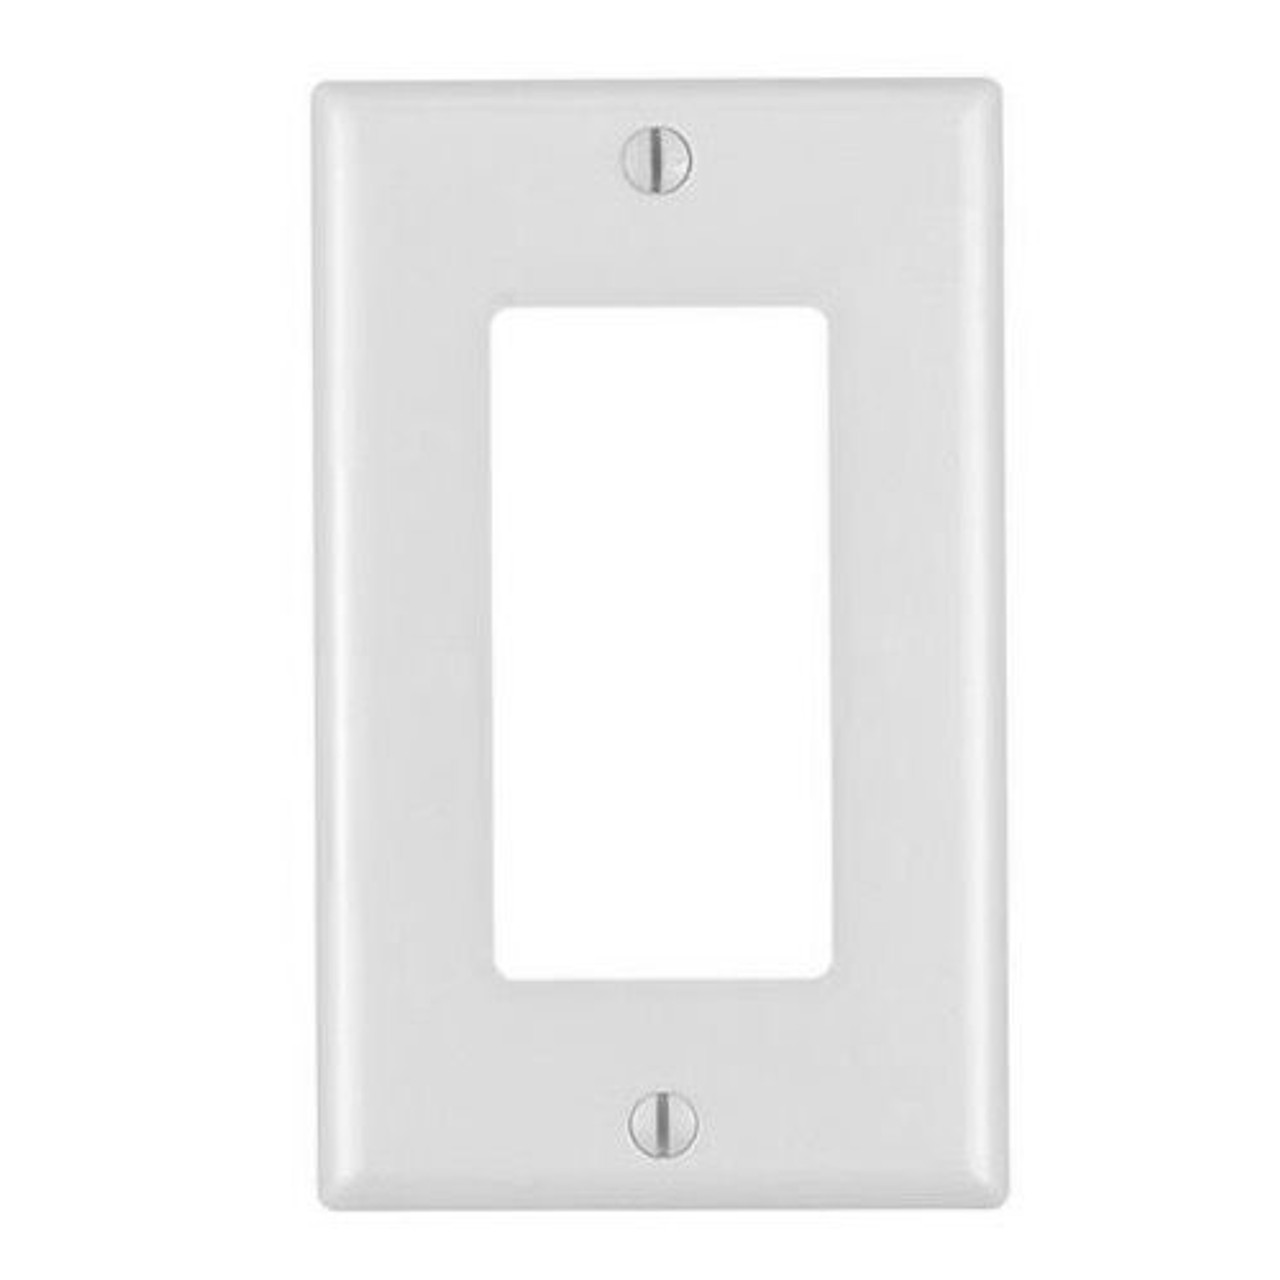 Wall Plate Blank White Leviton Decora High Abuse Nylon Audio Video Signal Outlet Cover with Large Device Component Switch Jack Opening, Part # 80401-W